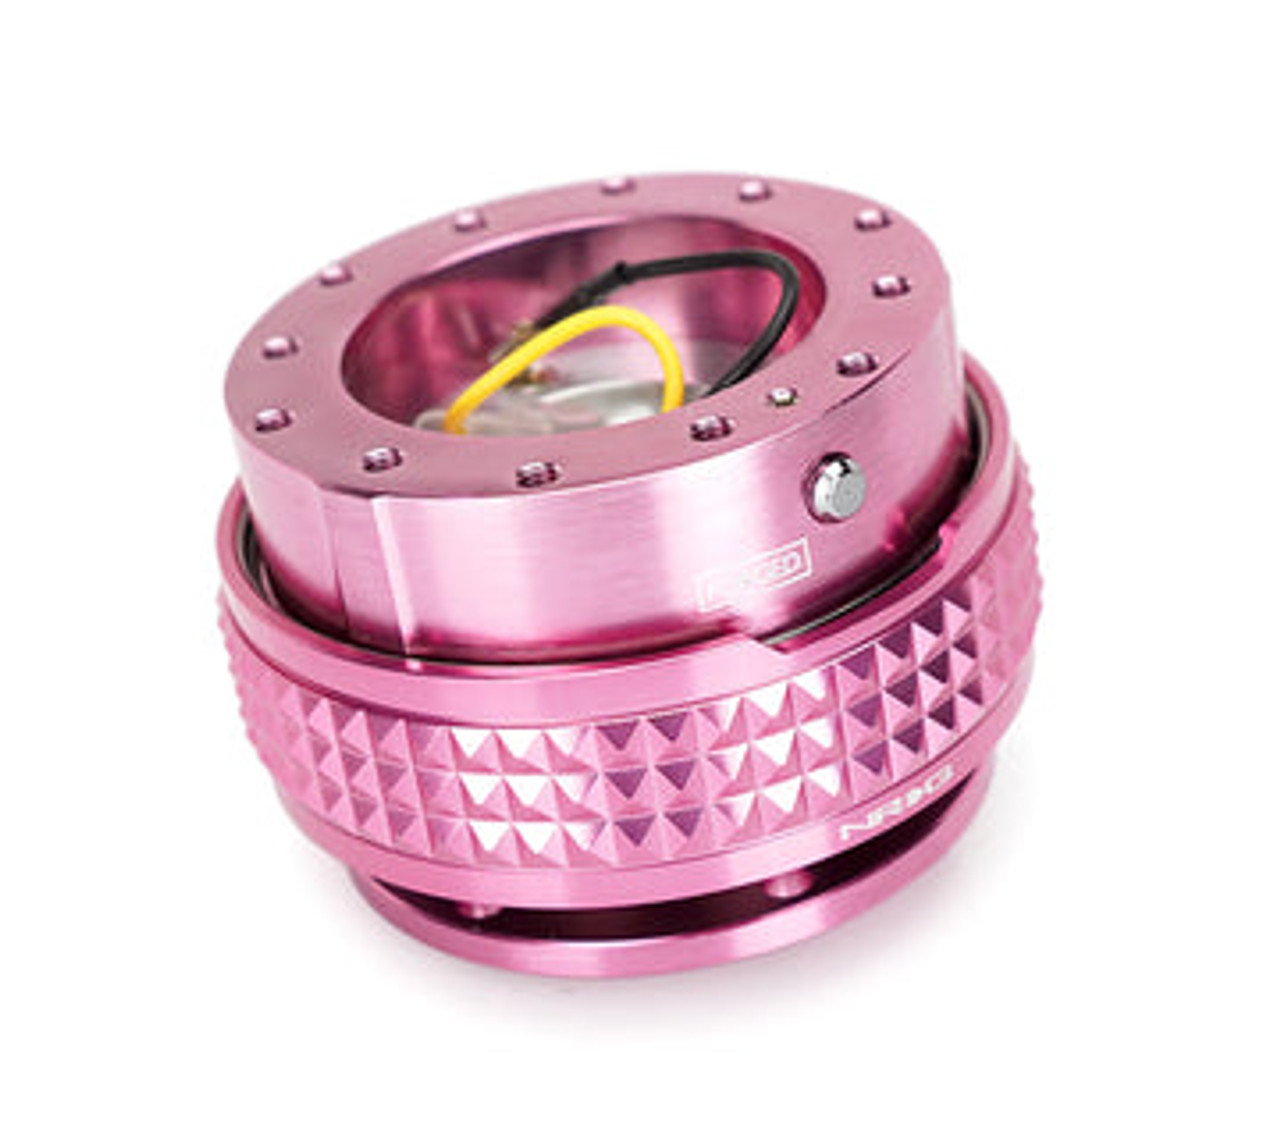 NRG Quick Release Kit - Pyramid Edition - Pink Body / Pink Pyramid Ring